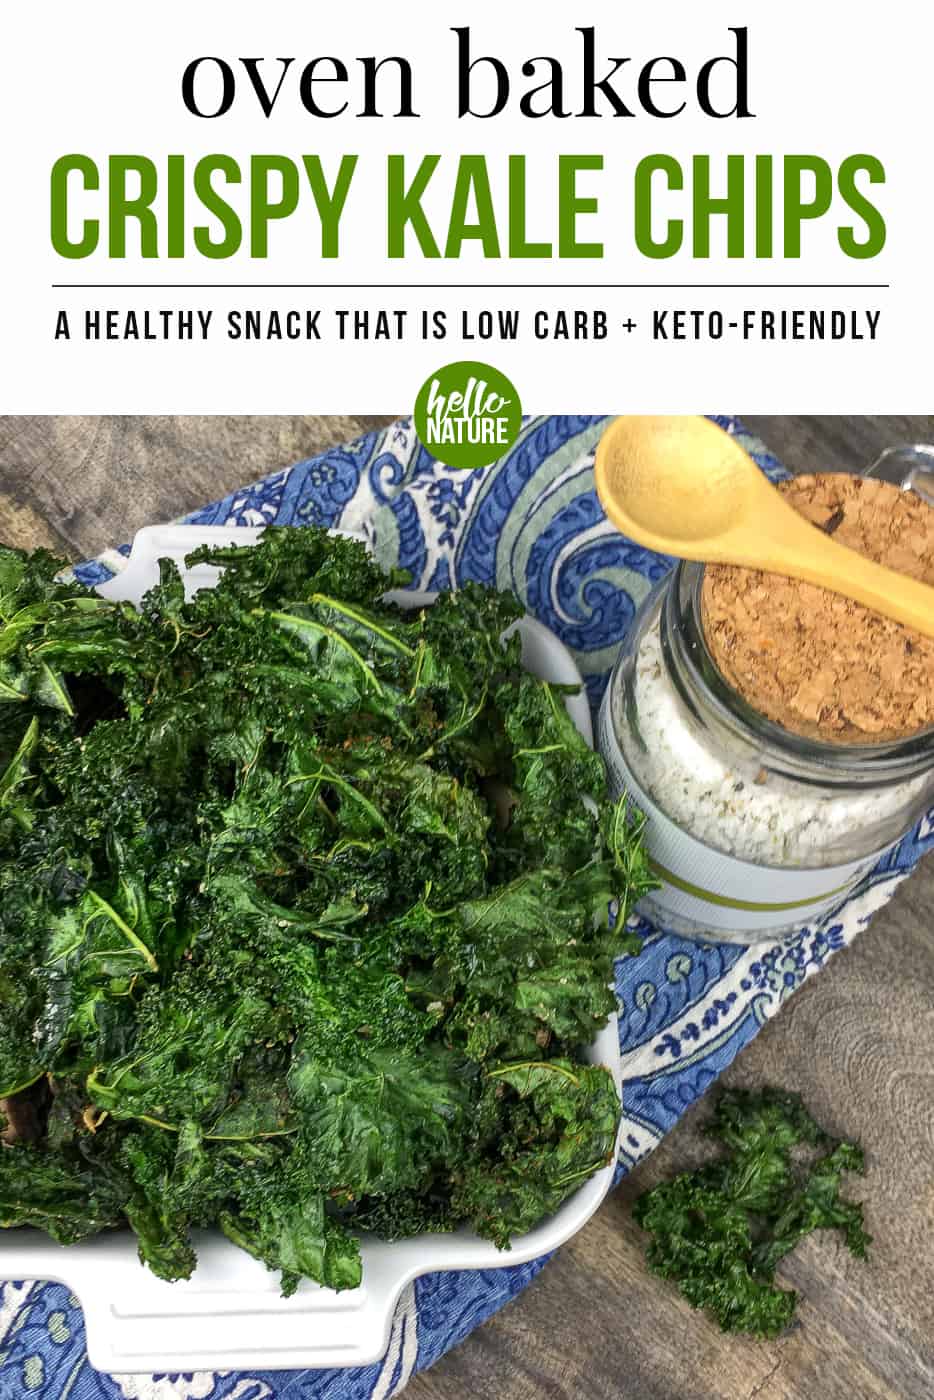 Want to learn how to make crispy kale chips? This easy keto chip recipe will become your new favorite healthy snack in no time! It’s a great healthy kale recipe and can be made in less than 20 minutes. #KetoChip #KaleChip #CrispyKaleChip #HealthyEating #HealthySnack #Keto #KetoFriendly #LowCarb #LowCarbSnack #KetoSnack #KaleRecipe